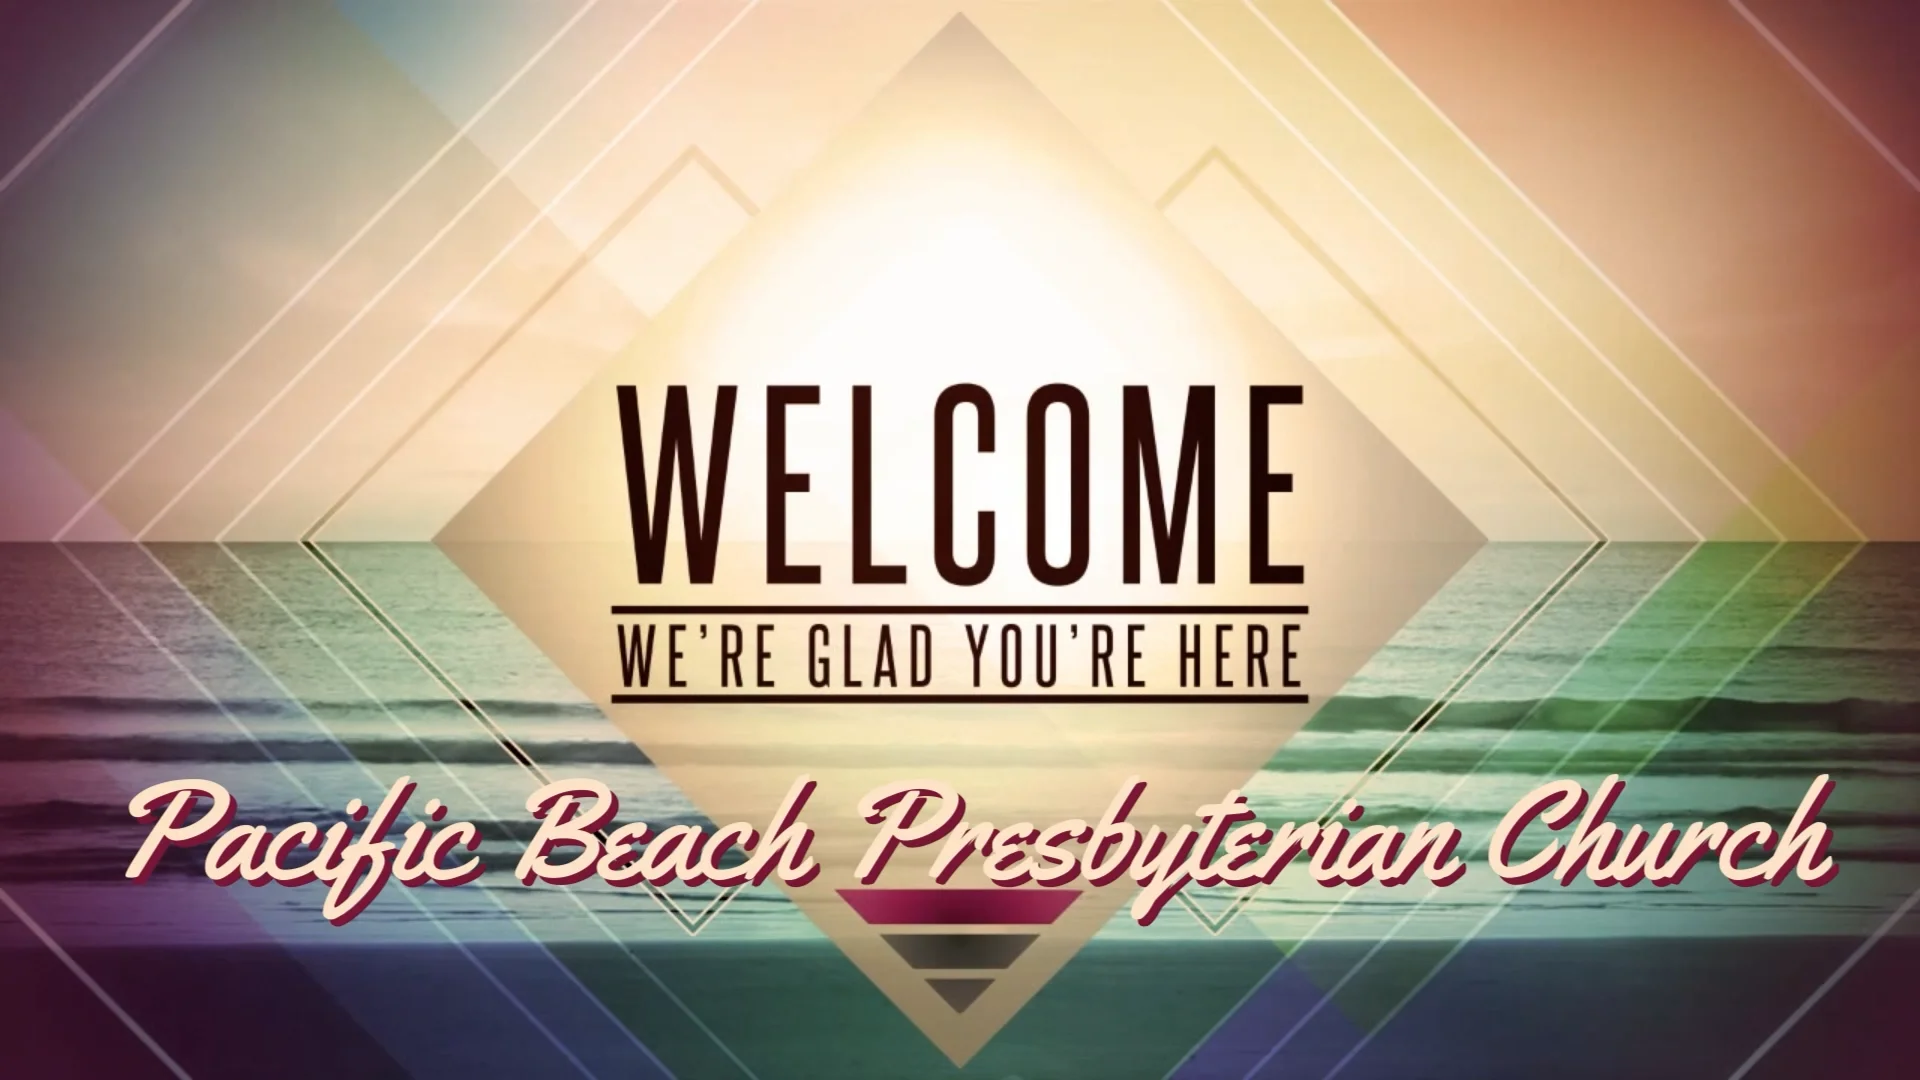 Welcome project. Welcome background. Welcome Worship. Welcome to Church. Welcome Slide.